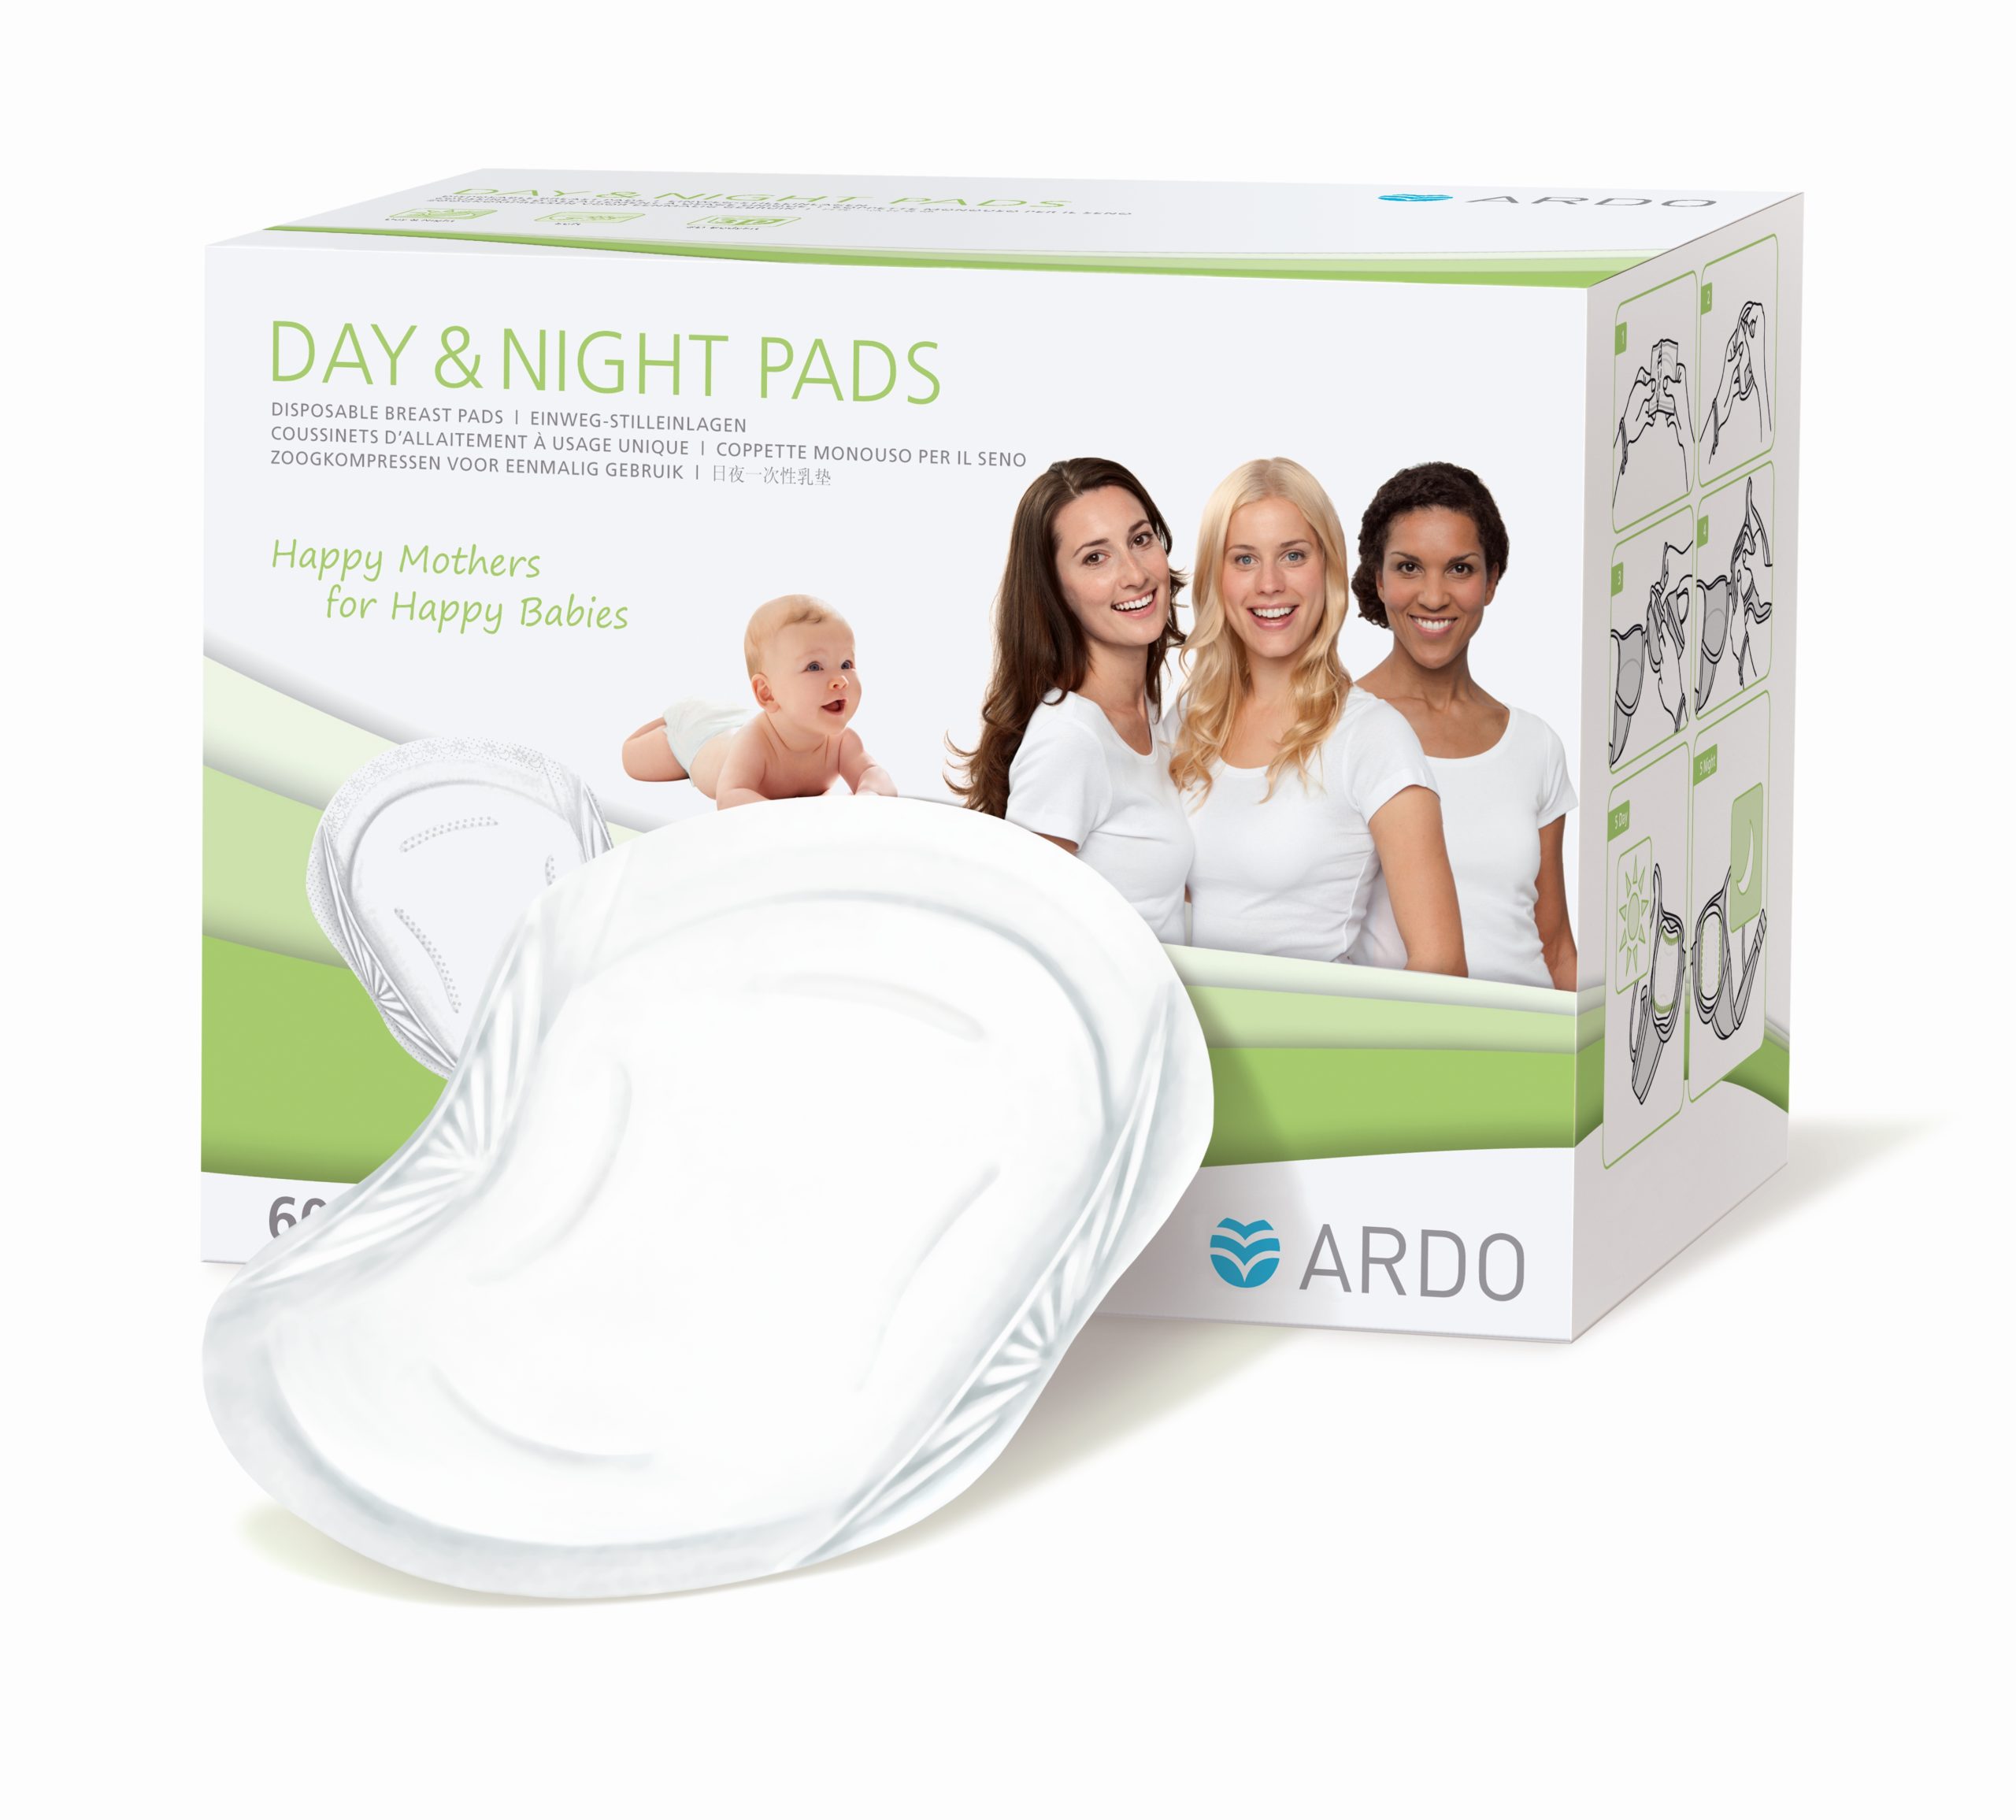 Ardo Day & Night Pads, Breast Pads for Breastfeeding, Ultra Absorbent, Help  Prevent Leakage (60 Disposable Nursing Pads, Individually Wrapped)